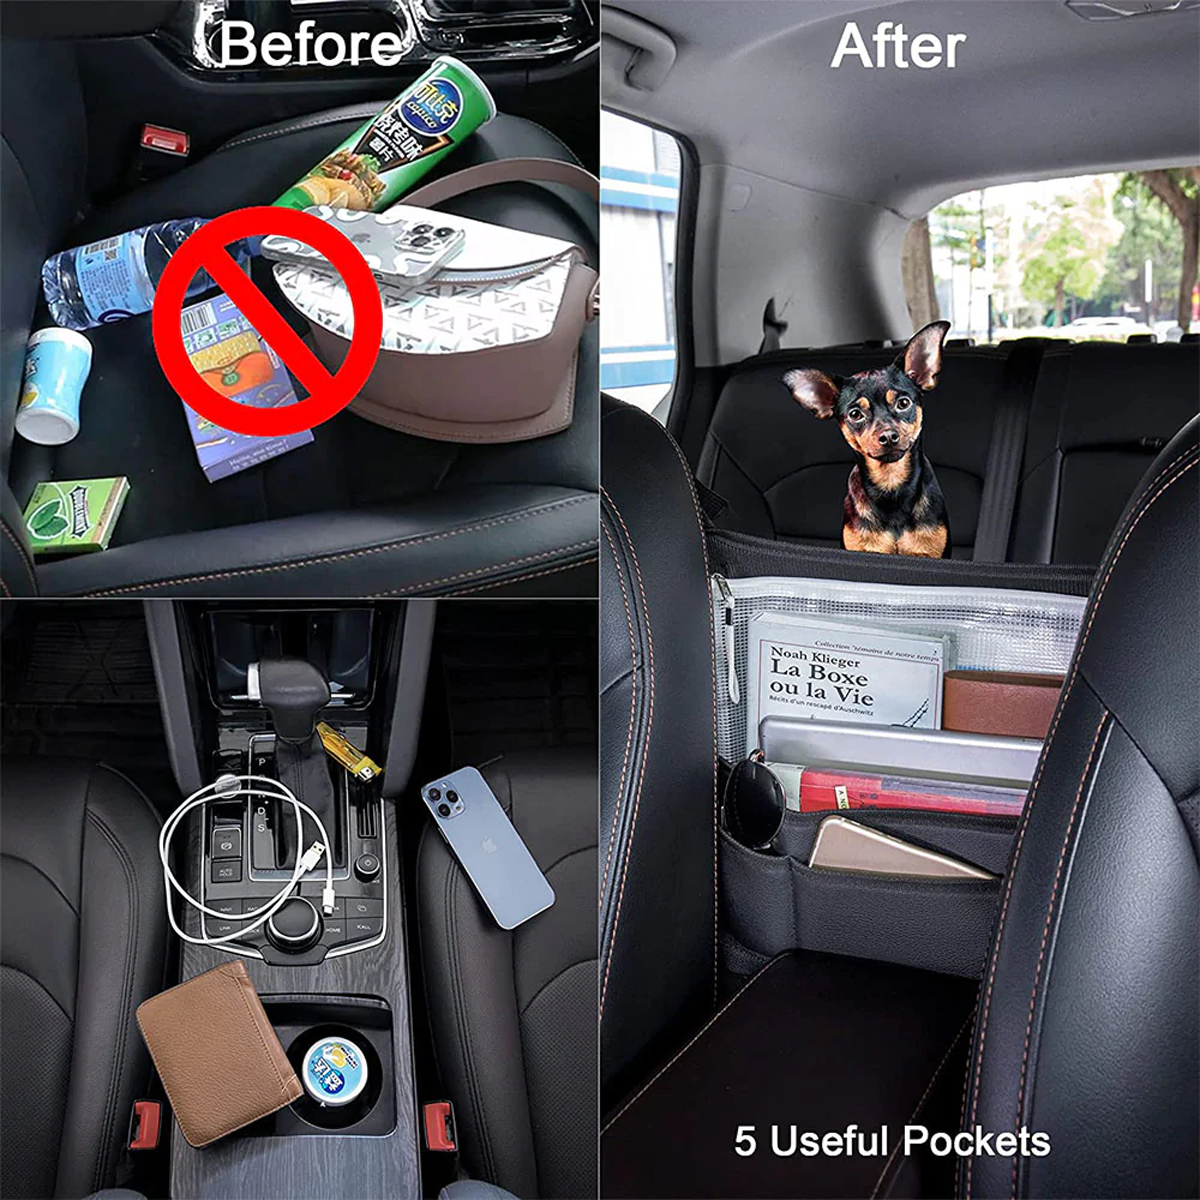 Custom Text For Car Purse Holder for Car Handbag Holder Between Seats Premium PU Leather, Compatible with All Cars, Auto Driver Or Passenger Accessories Organizer, Hanging Car Purse Storage Pocket Back Seat Pet Barrier MB11991